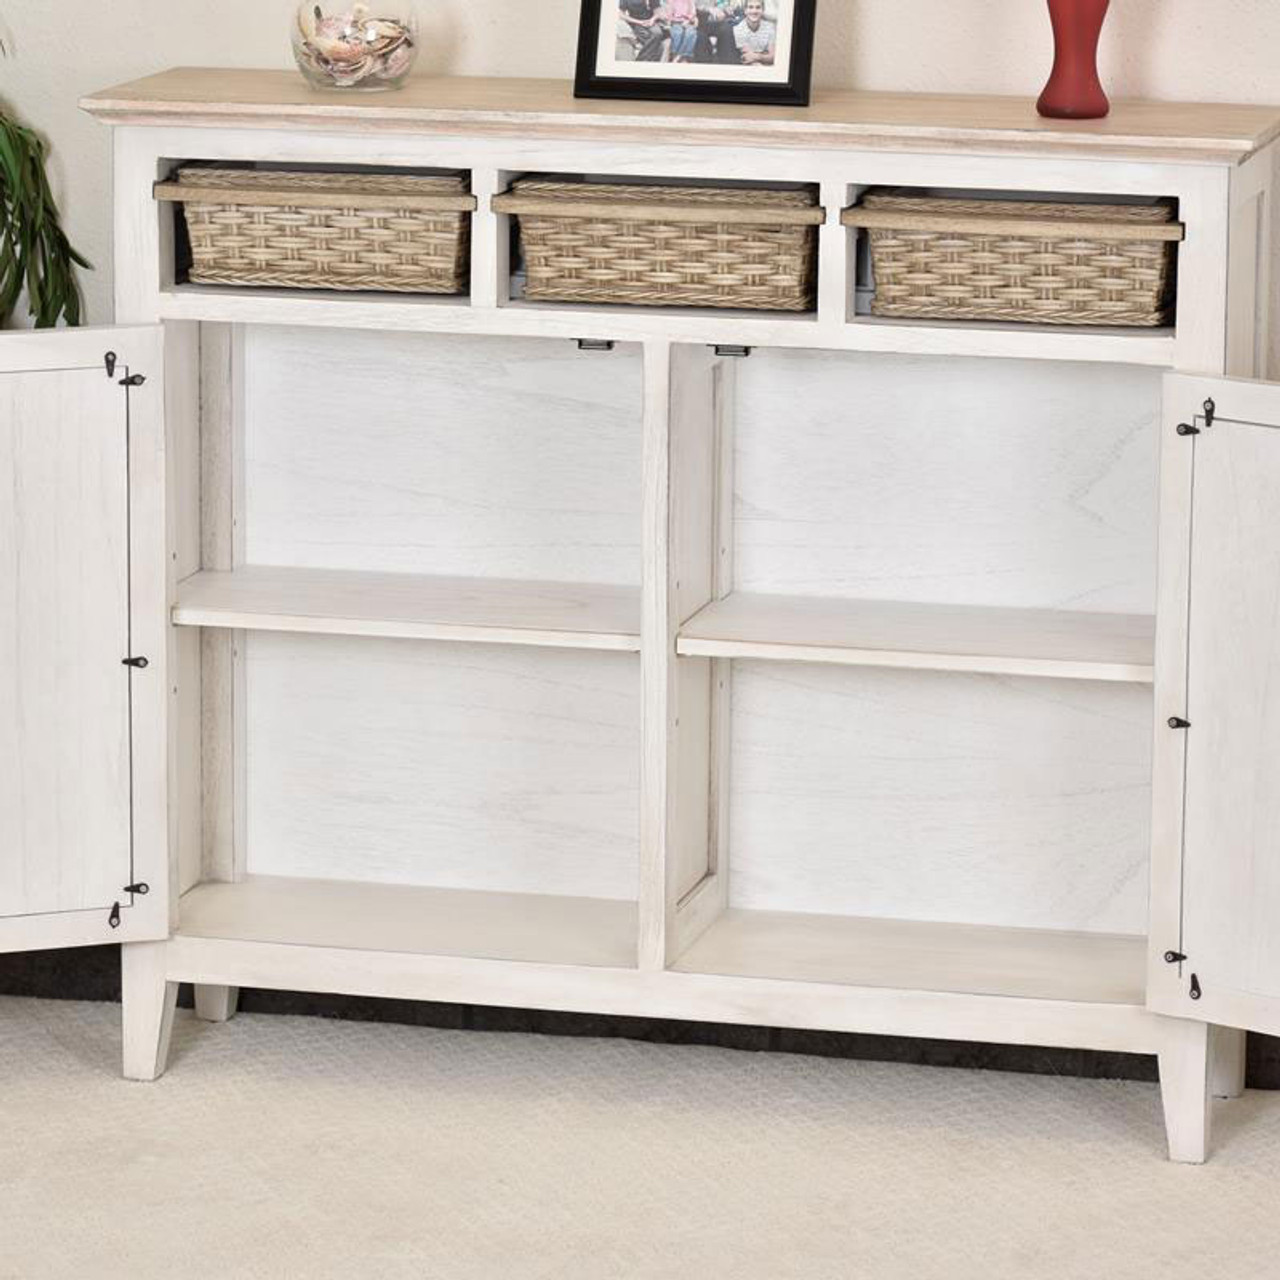 https://cdn11.bigcommerce.com/s-88gpz4/images/stencil/1280x1280/products/4043/18418/Captiva-Island-casual-distressed-entry-cabinet-with-baskets-and-fabric-inside__21416.1684872248.jpg?c=2&imbypass=on